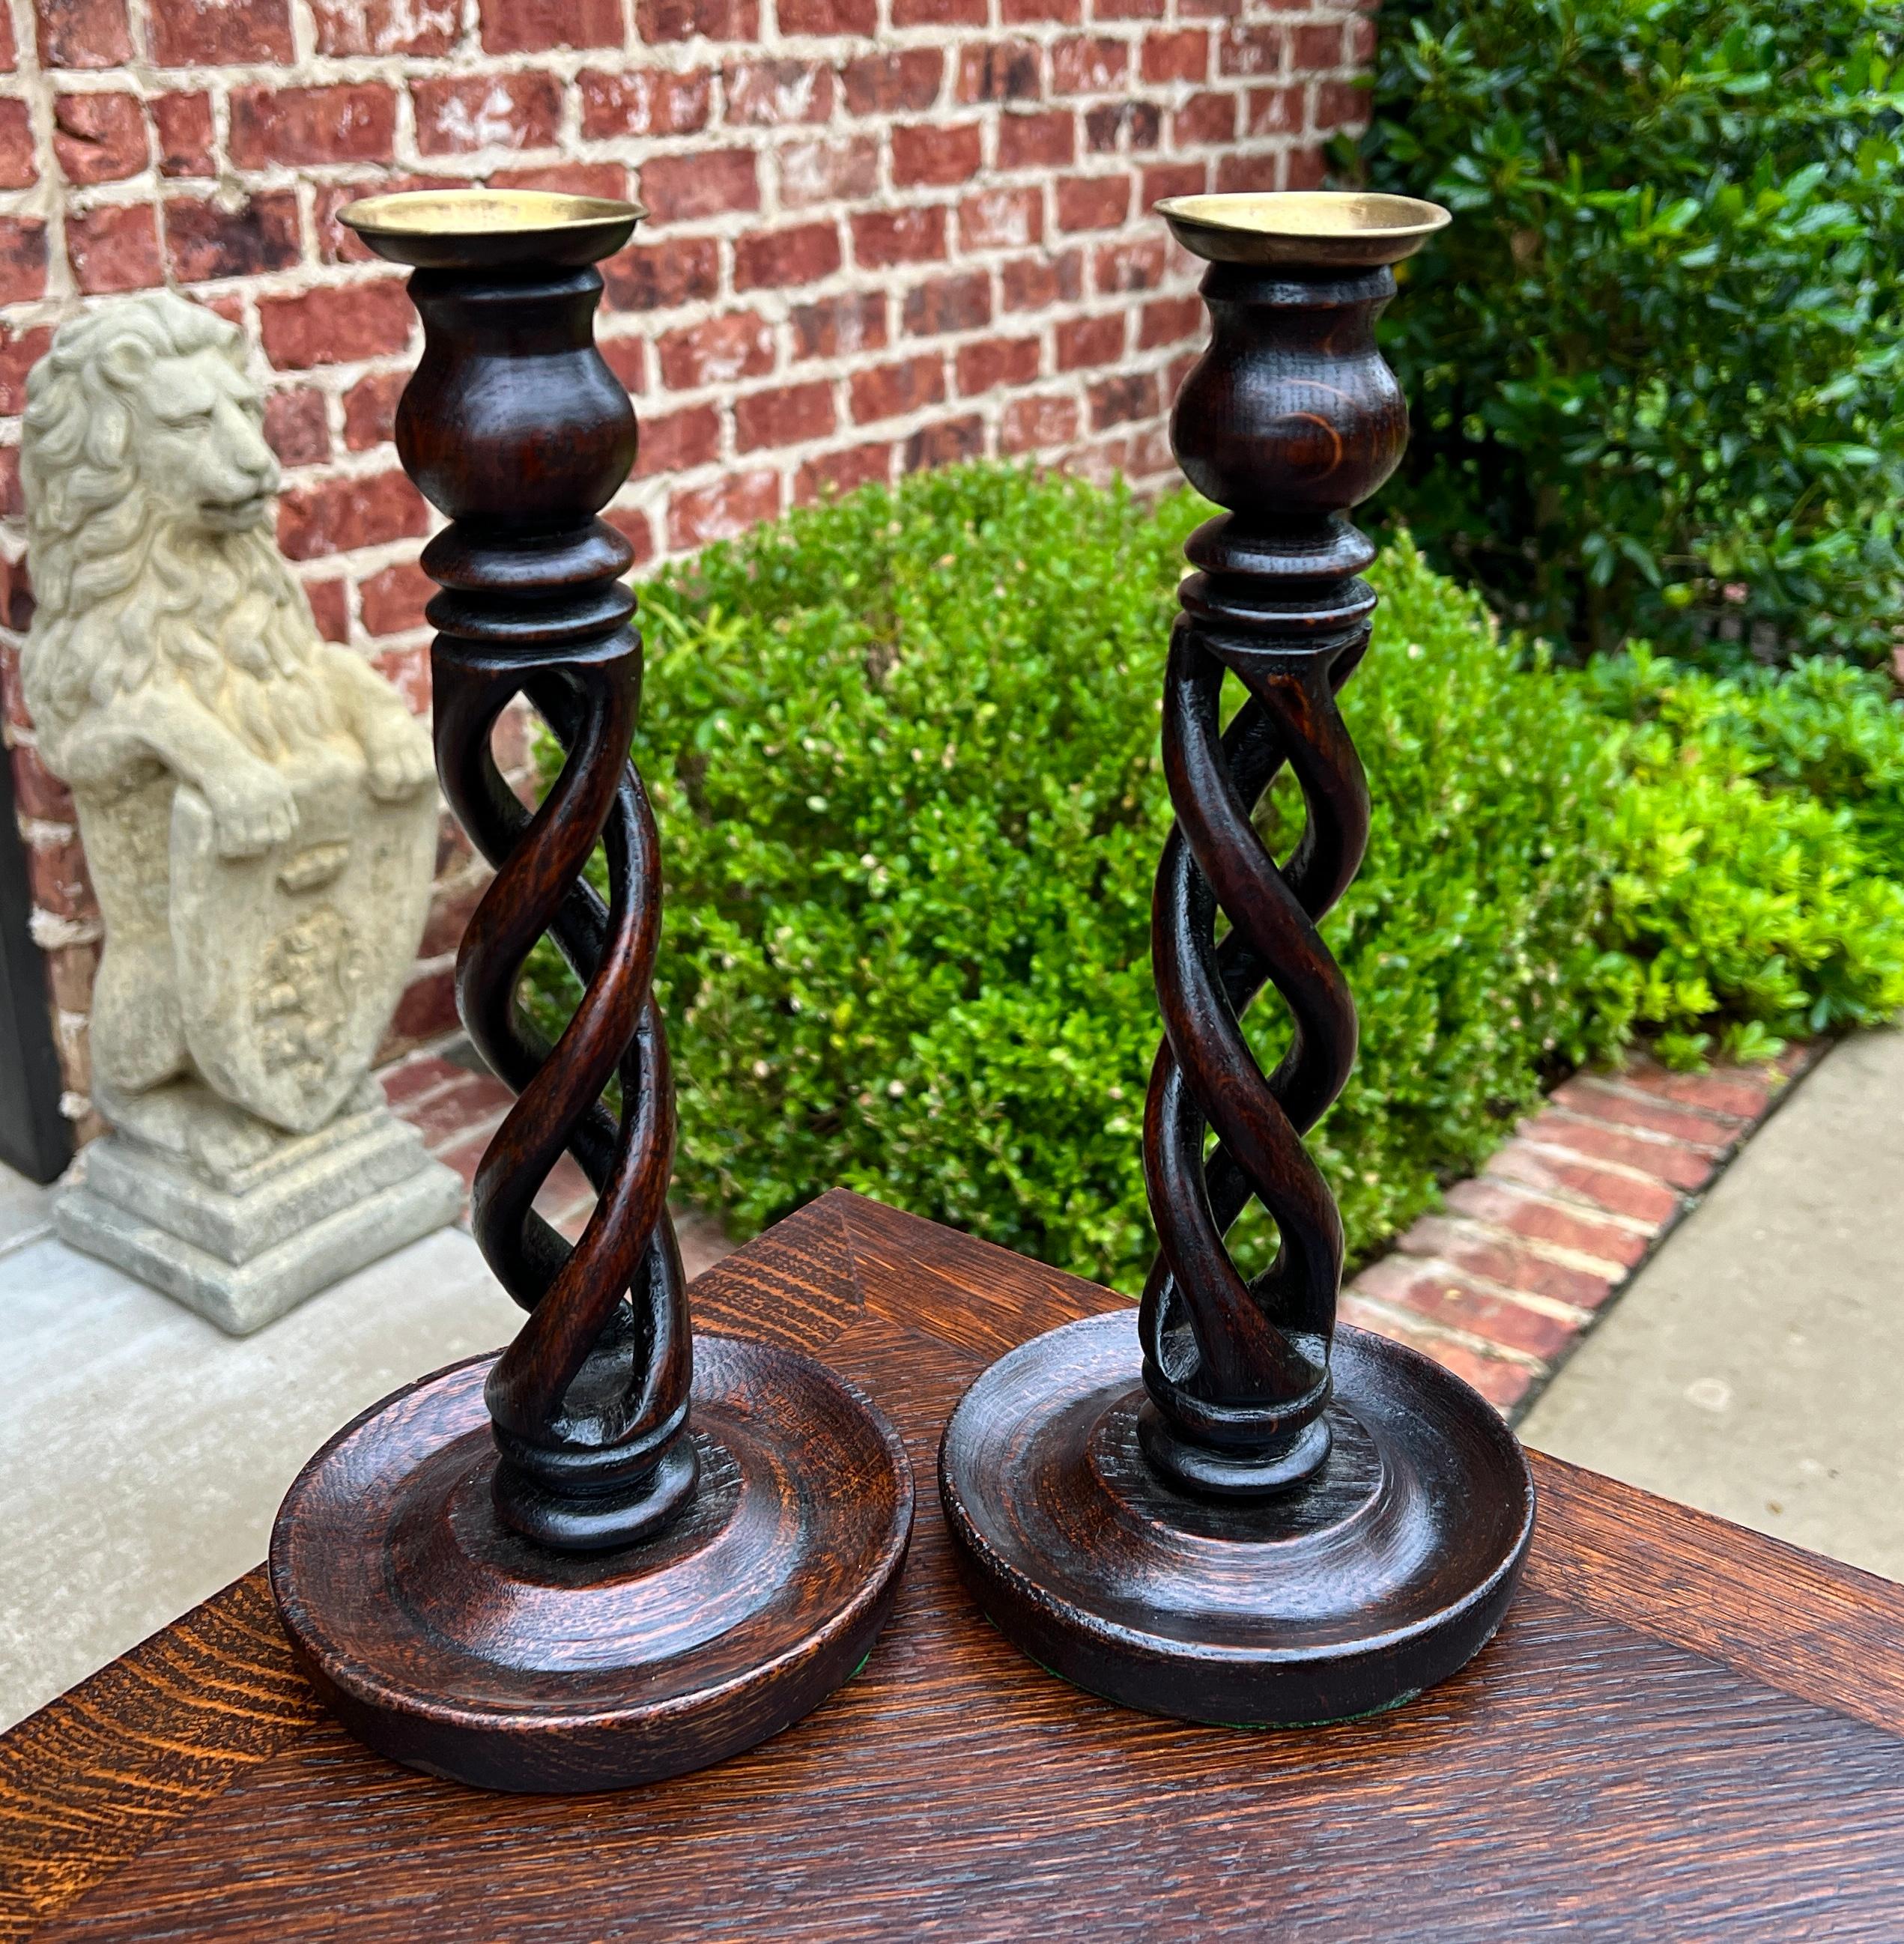  CHARMING Pair of Antique English Oak OPEN BARLEY TWIST Candlesticks Candle Holders c. 1930s

Beautiful open twists with dark oak patina

12.5